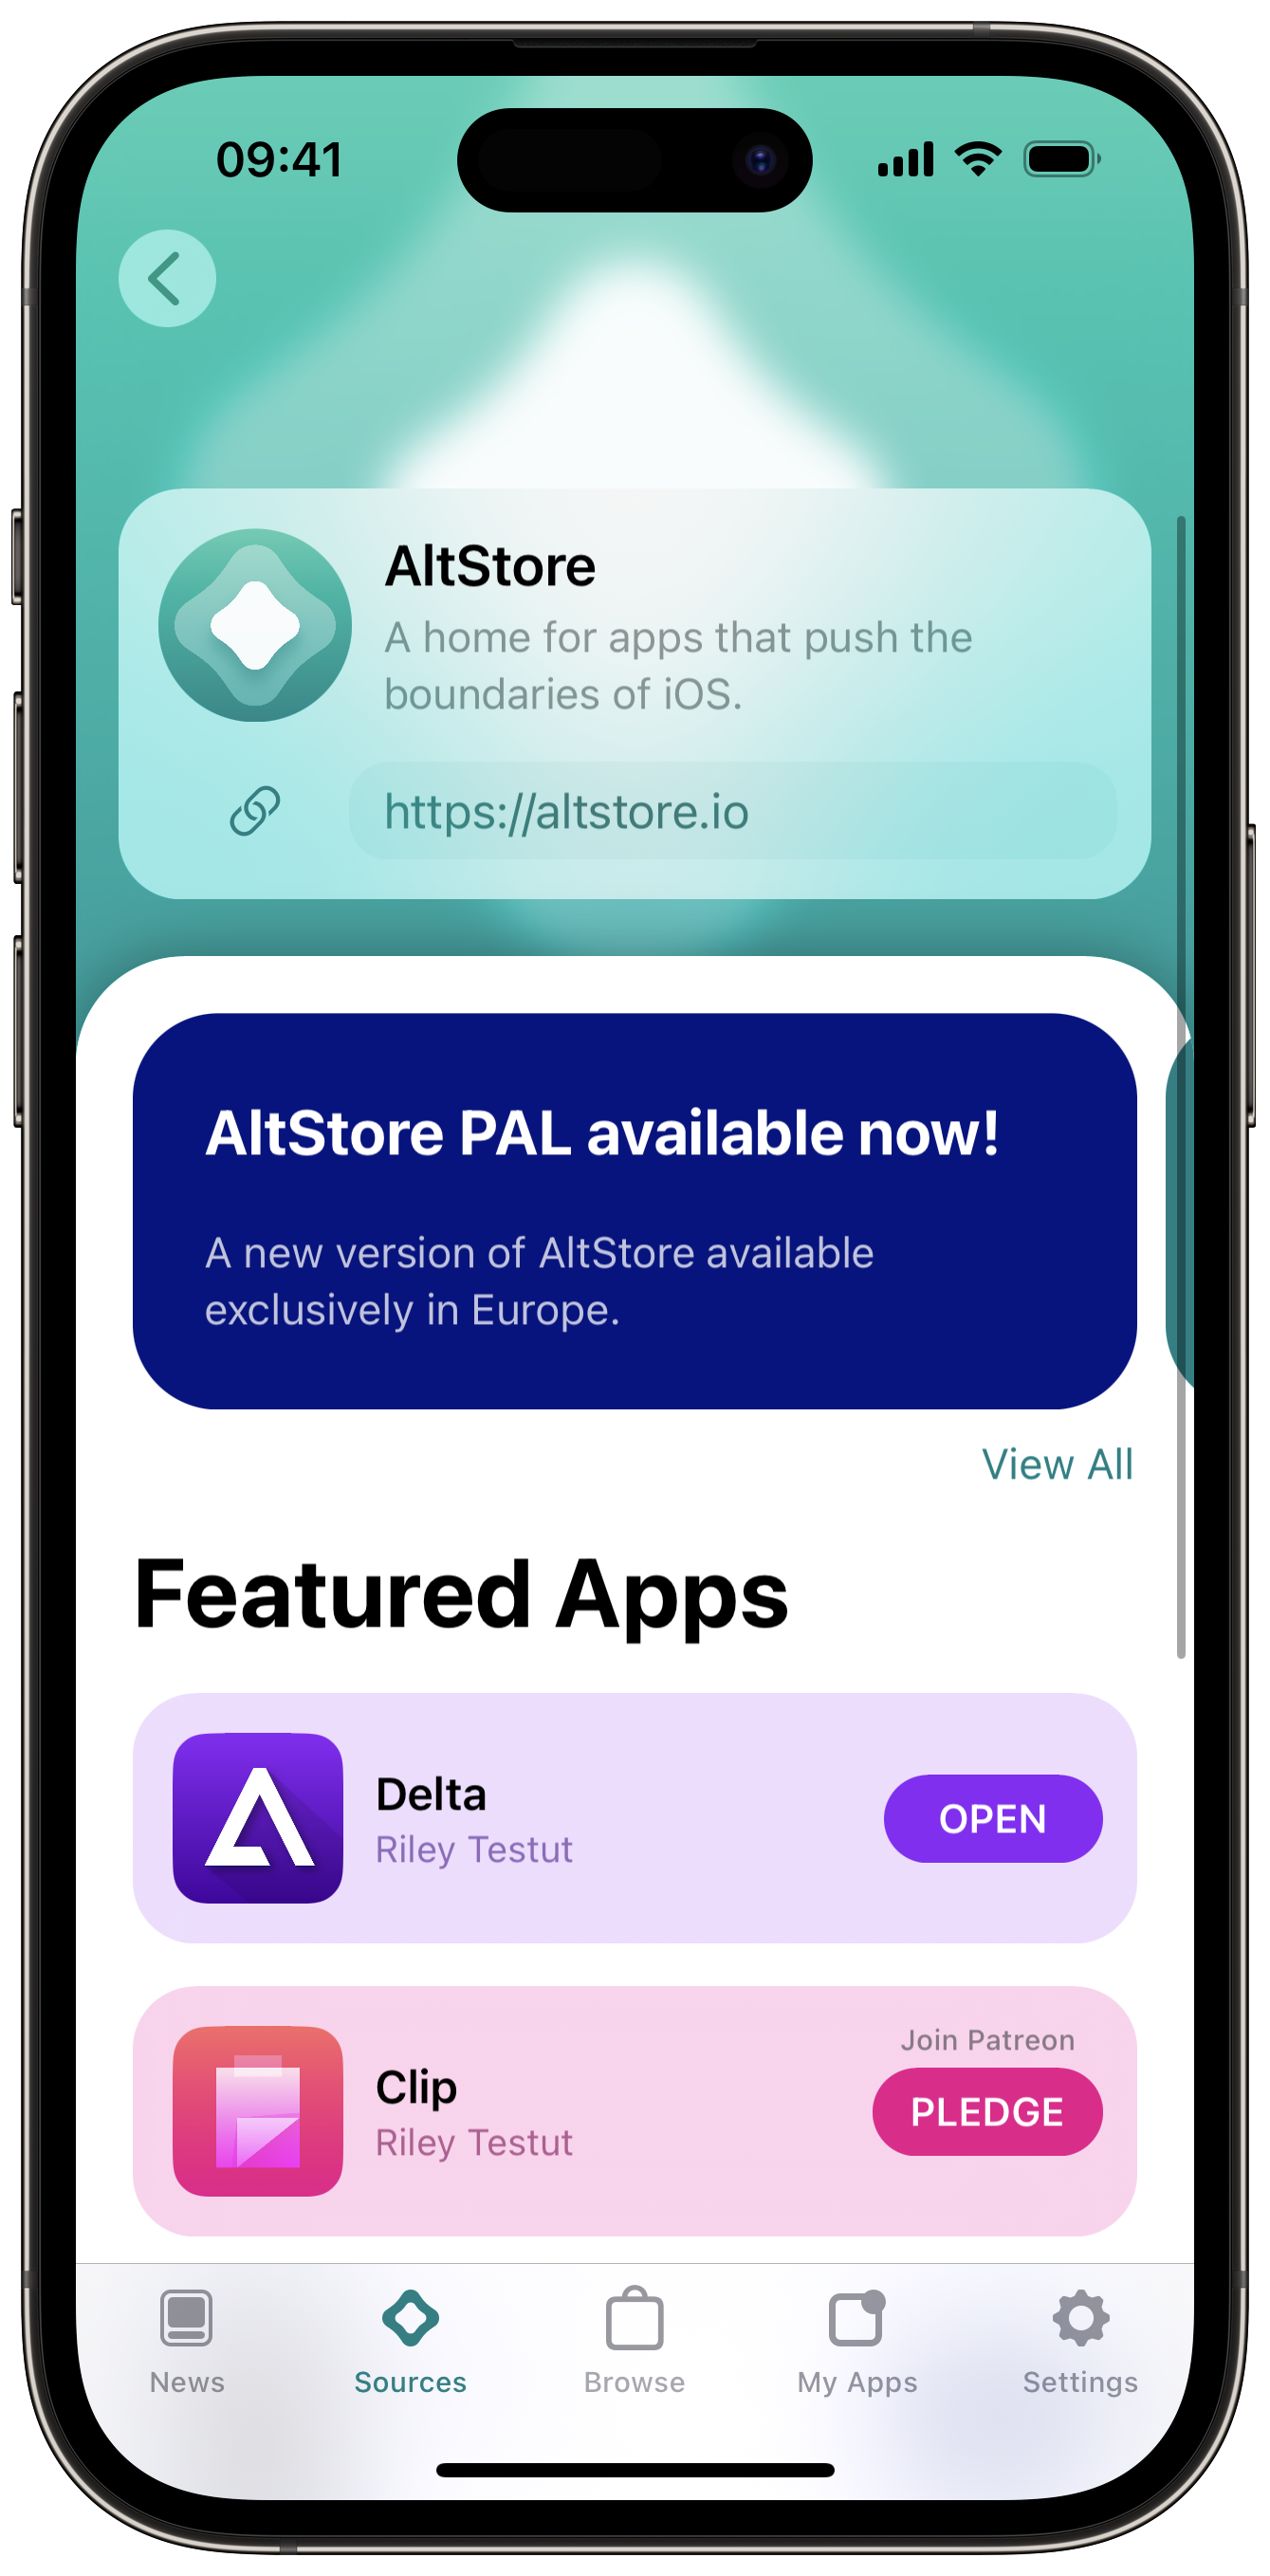 iPhone users in the EU get AltStore PAL, the first third-party app store